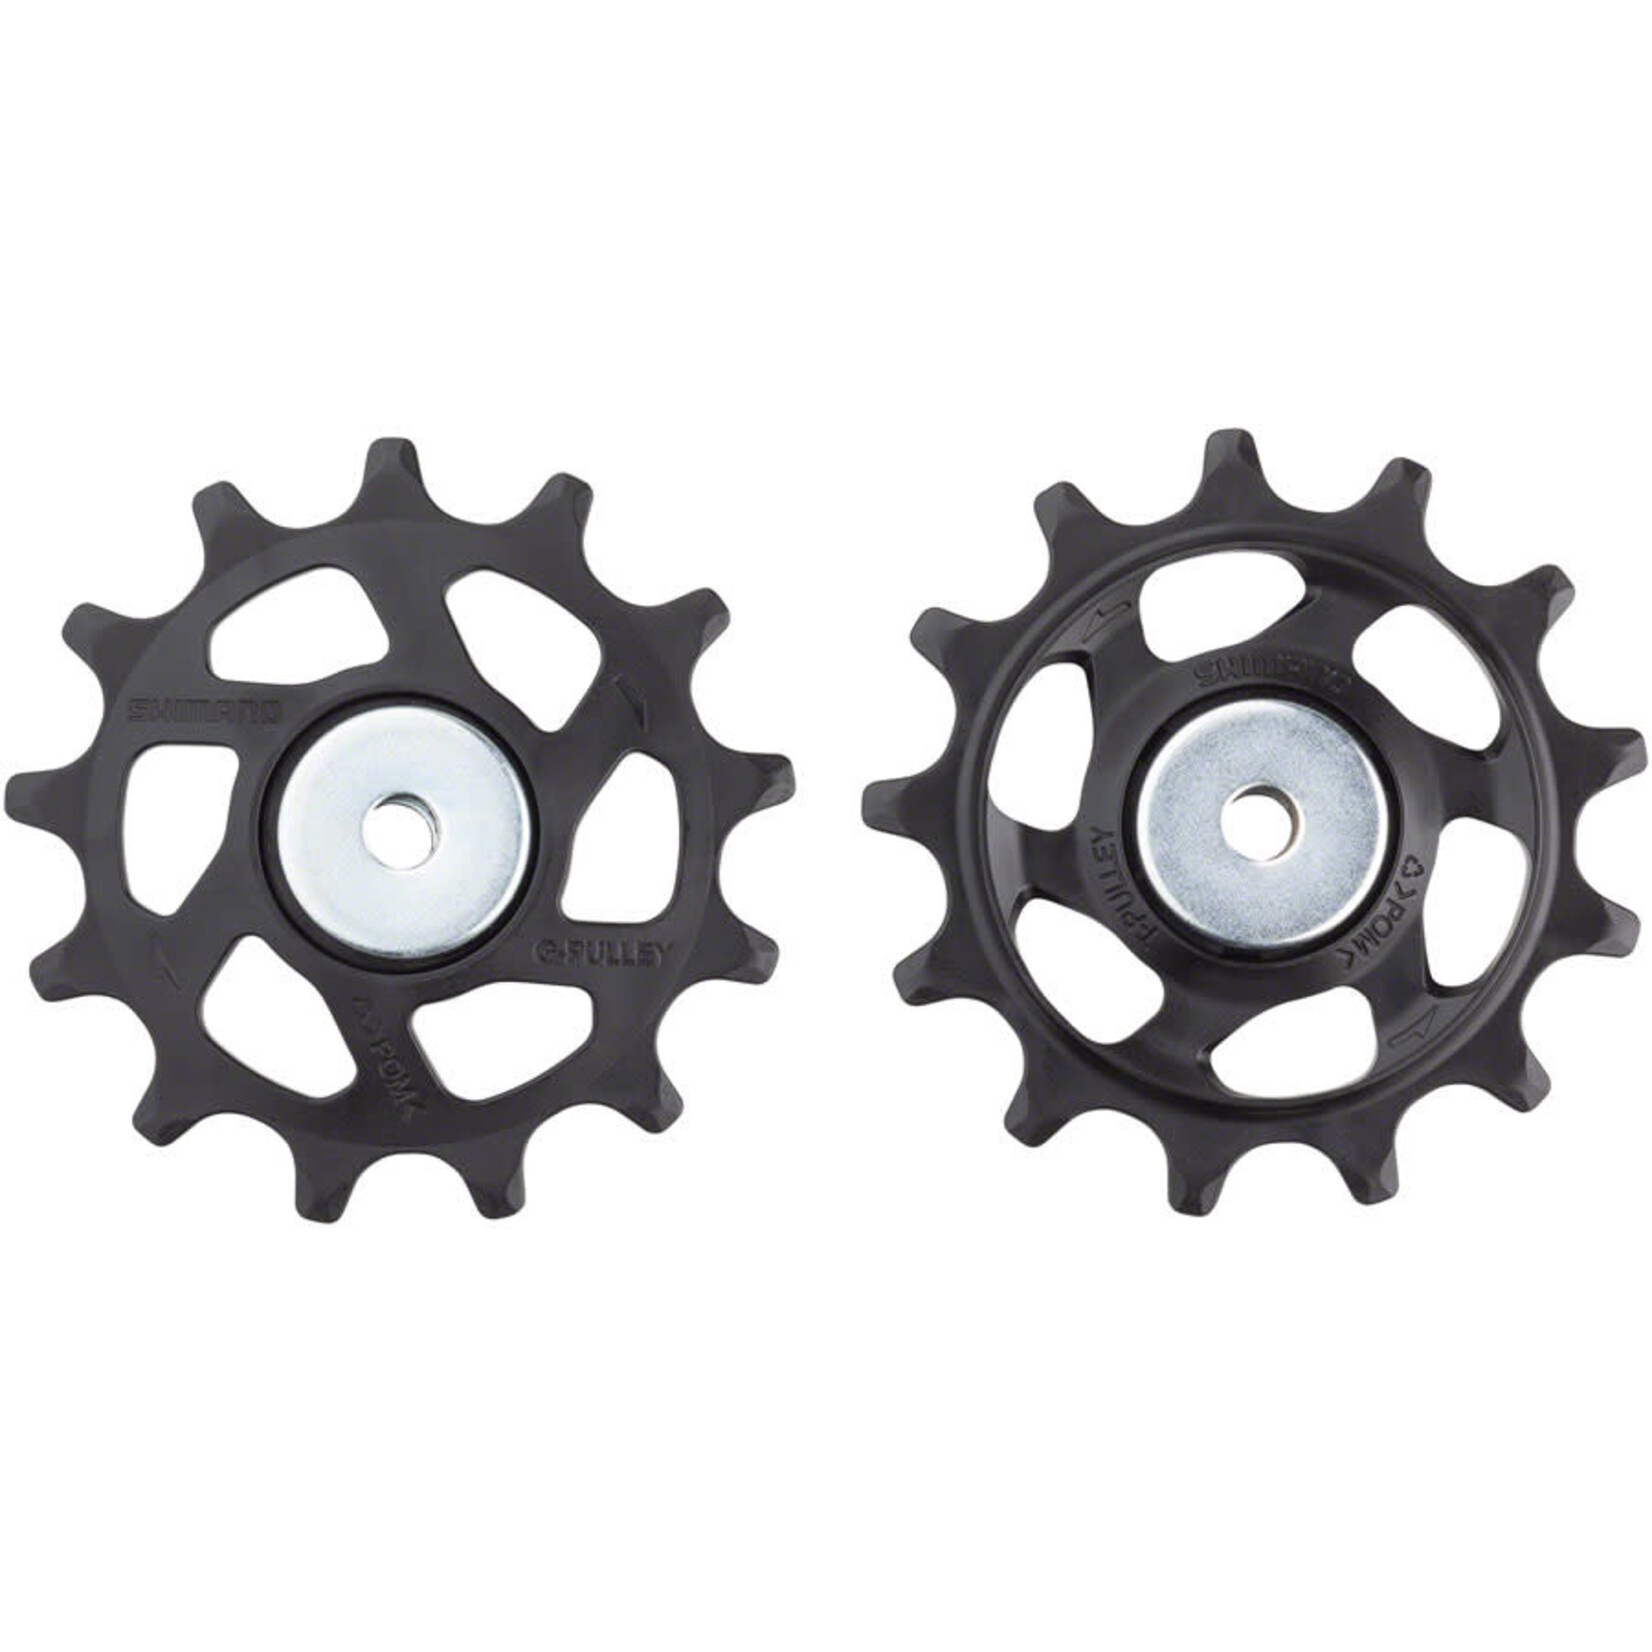 Shimano SLX RD-M7100 Rear Derailleur Tension and Guide Pulley Set